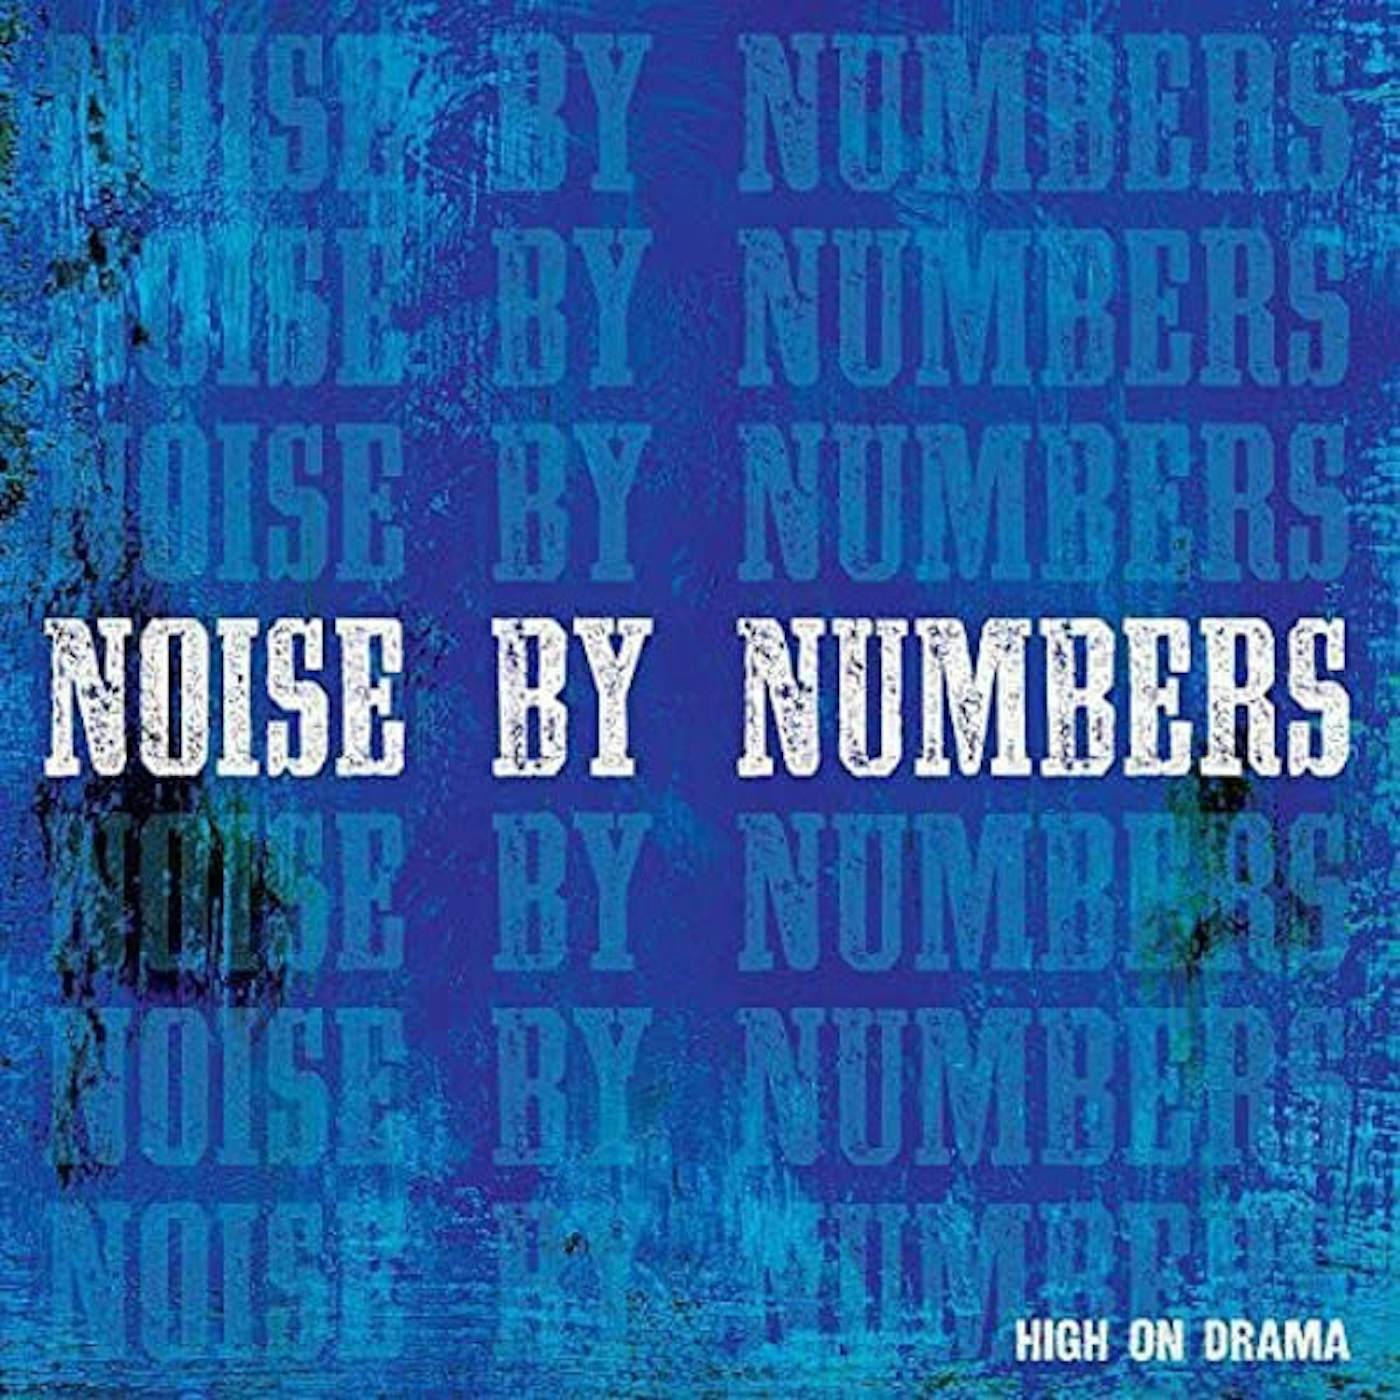 Noise By Numbers LP - High On Drama (Vinyl)